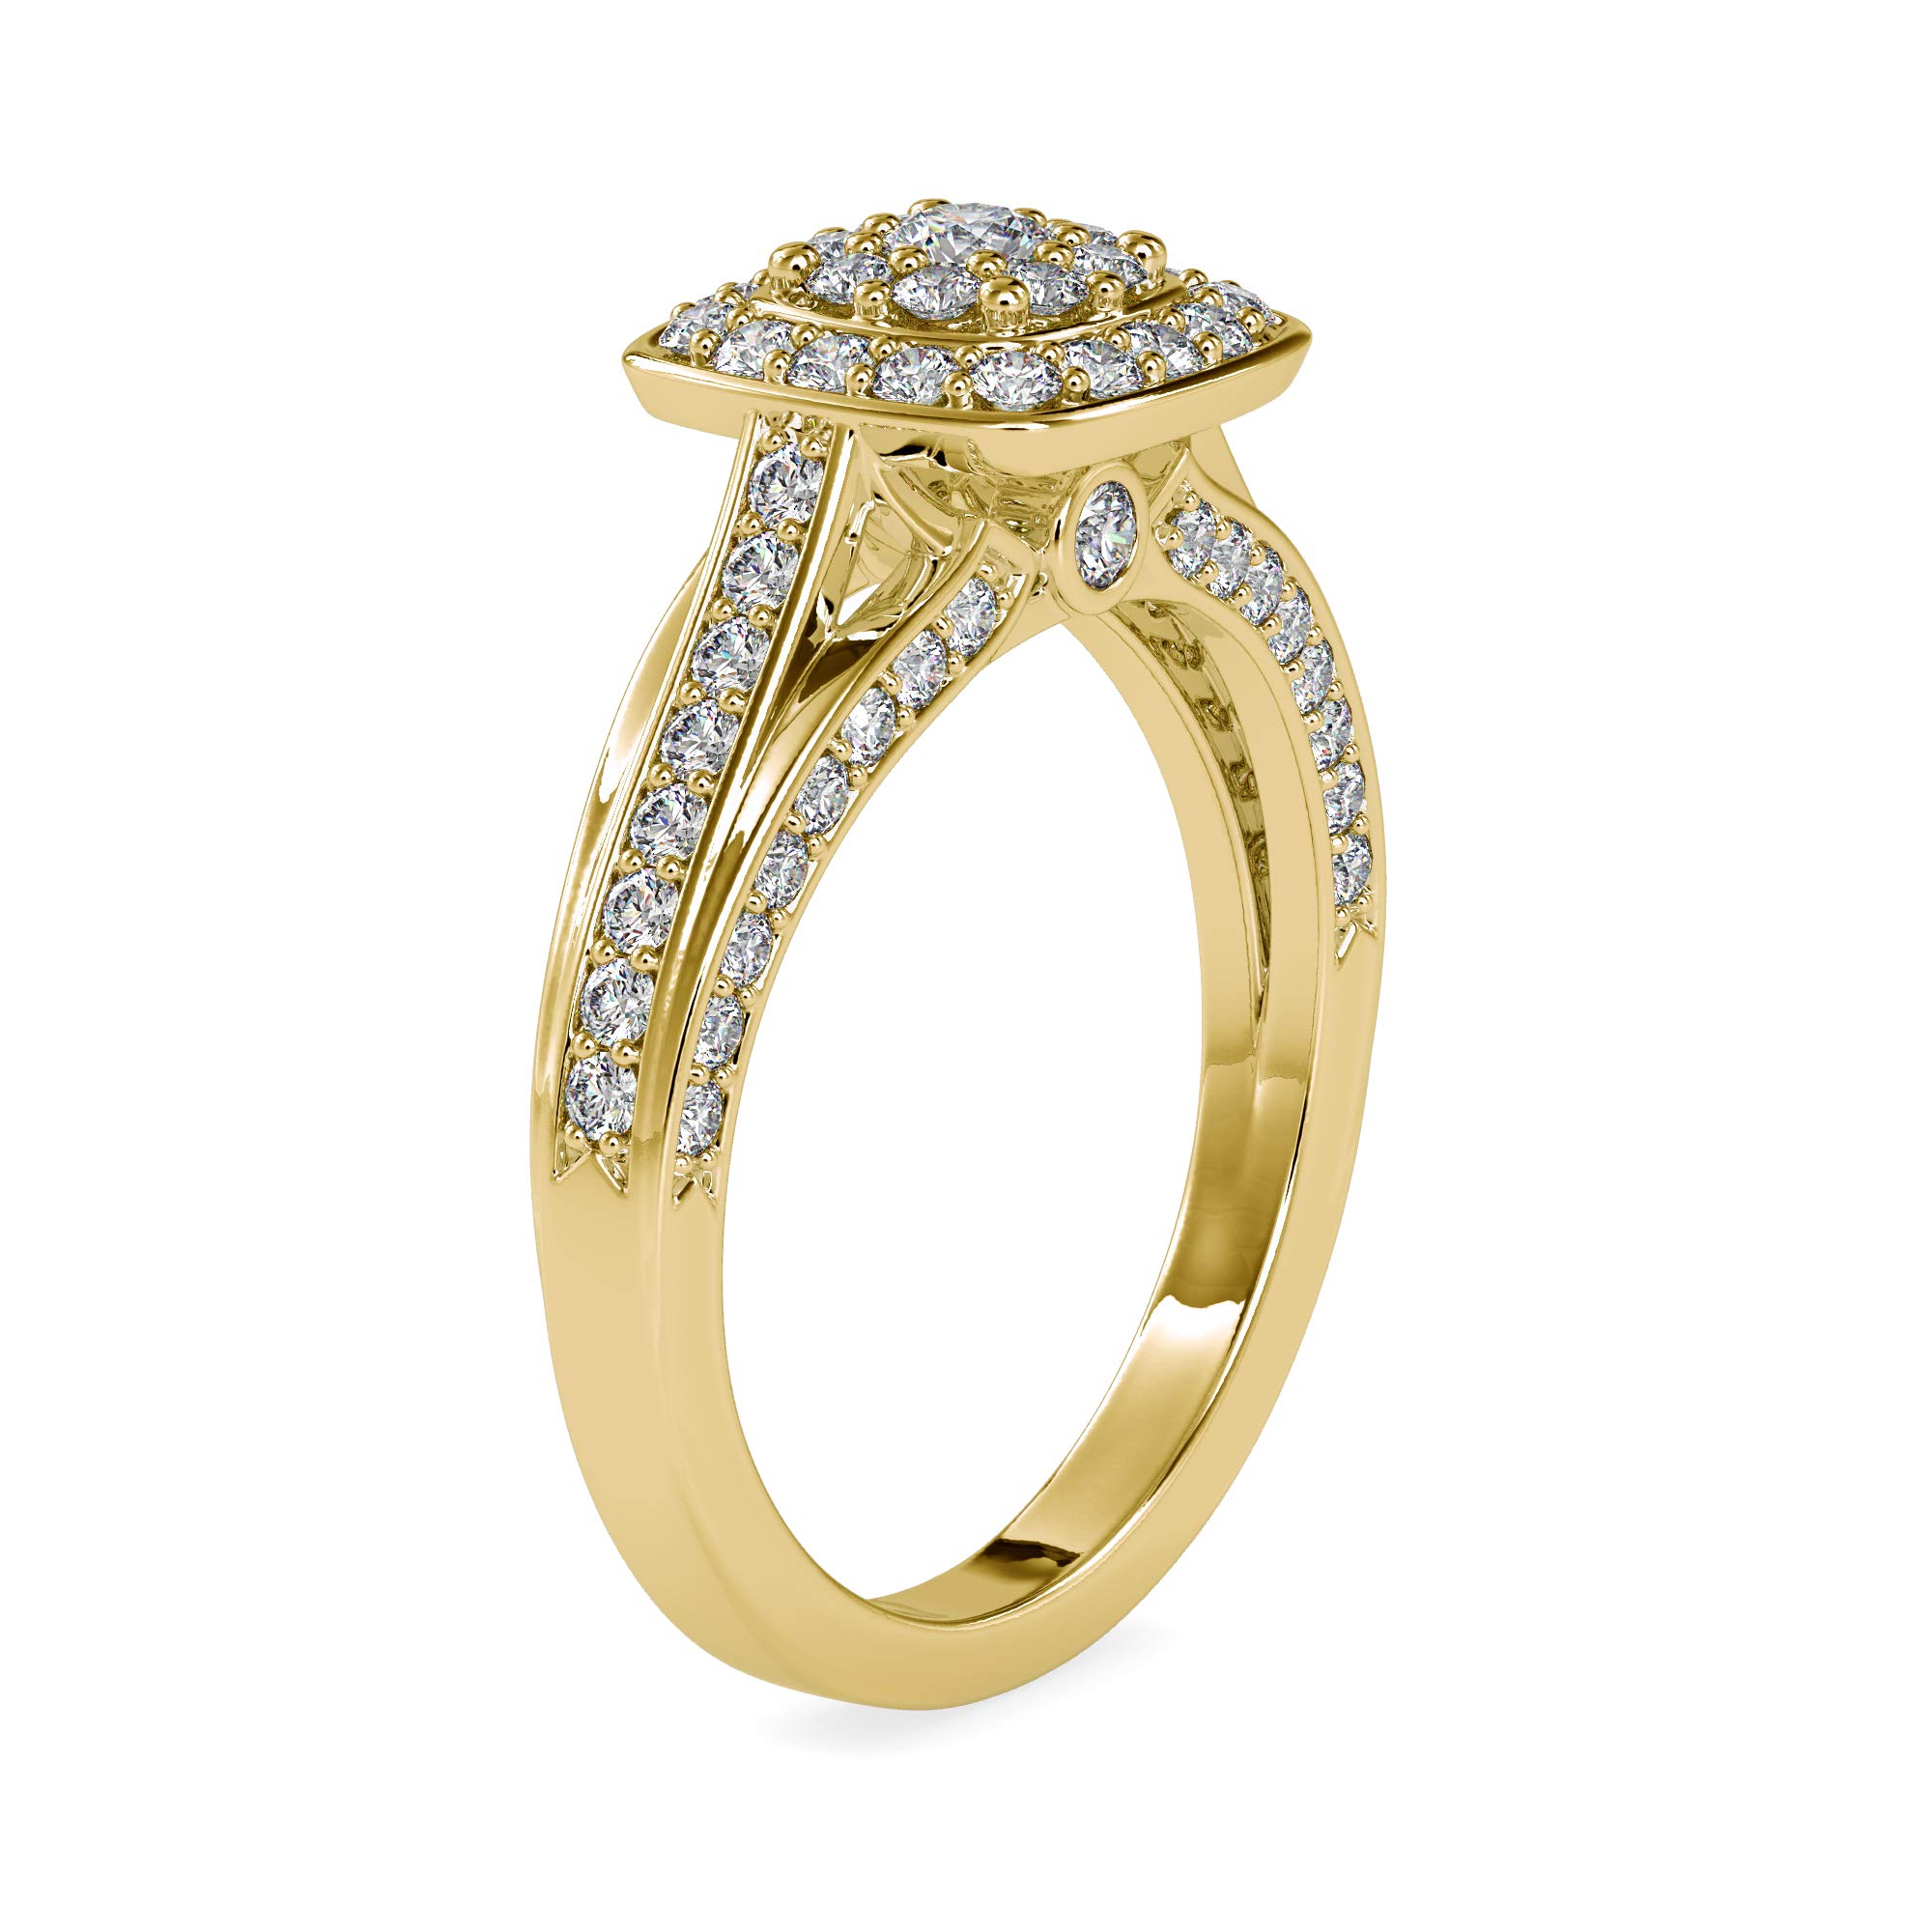 Certified Halo Style Diamond Ring Studded With 0.68 Carat Natural Diamonds in 18K White Gold/Yellow Gold/Rose Gold Natural Diamond Ring for Her Engagement Ceremony (IJ-SI)